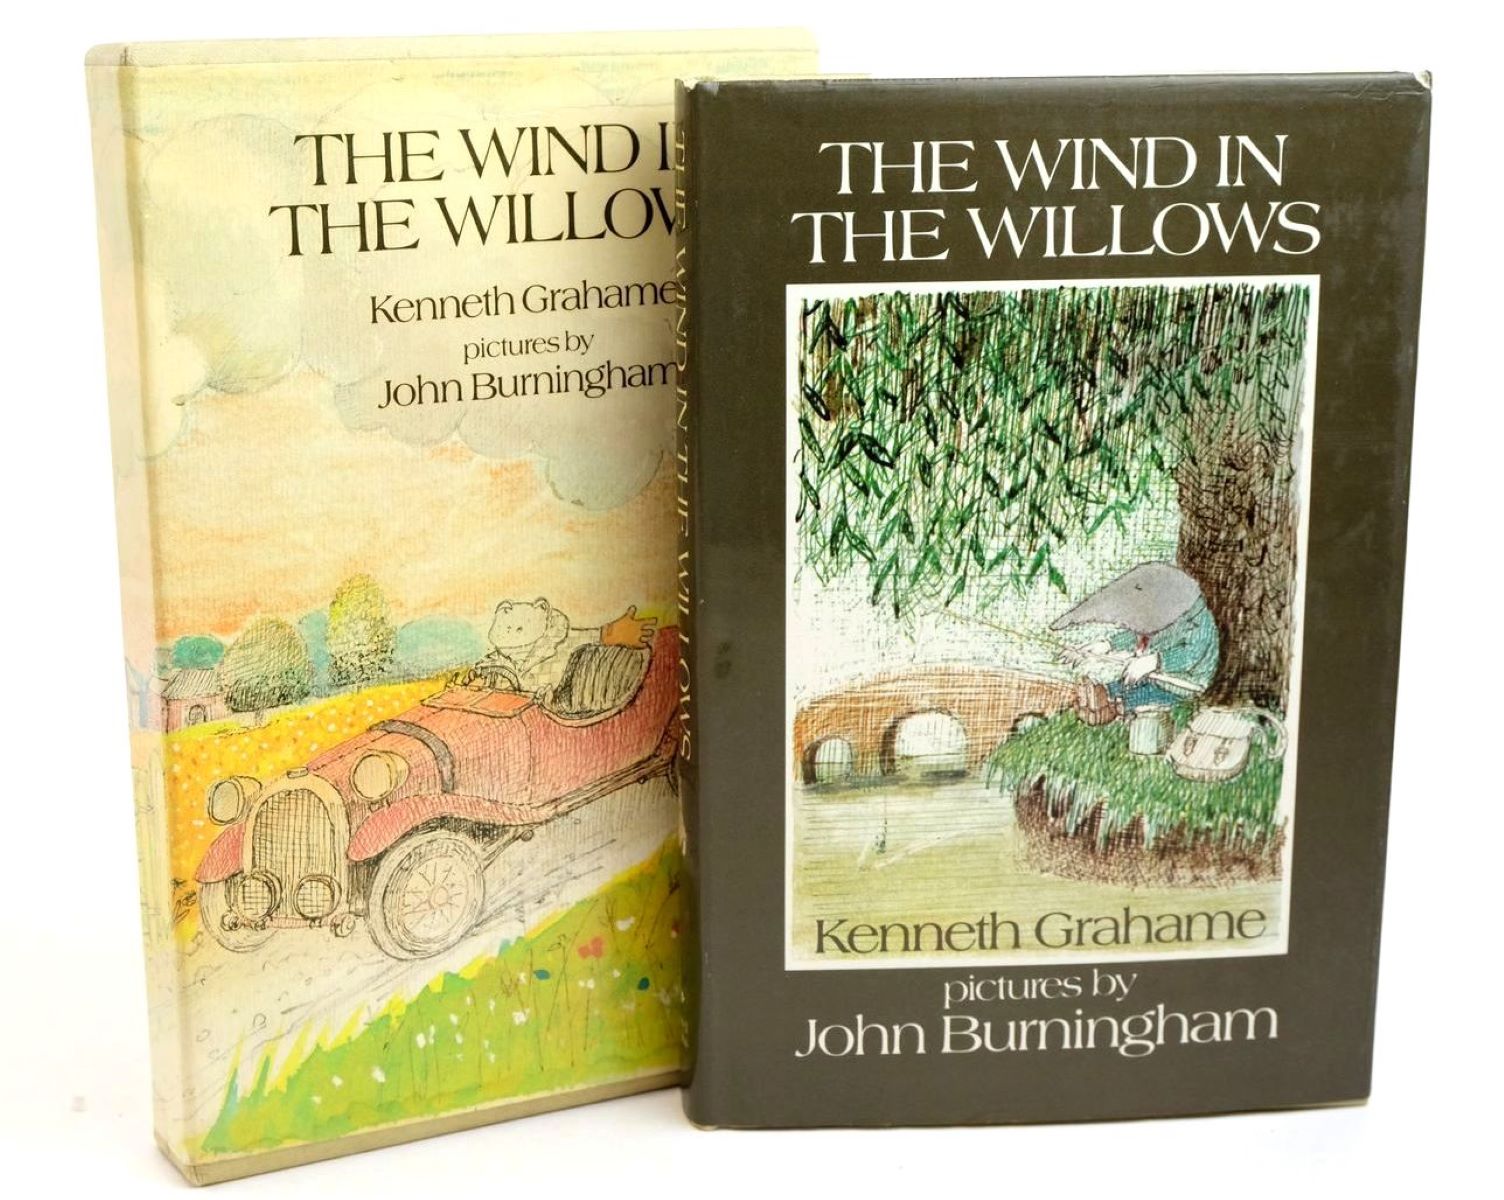 8-intriguing-facts-about-the-wind-in-the-willows-kenneth-grahame